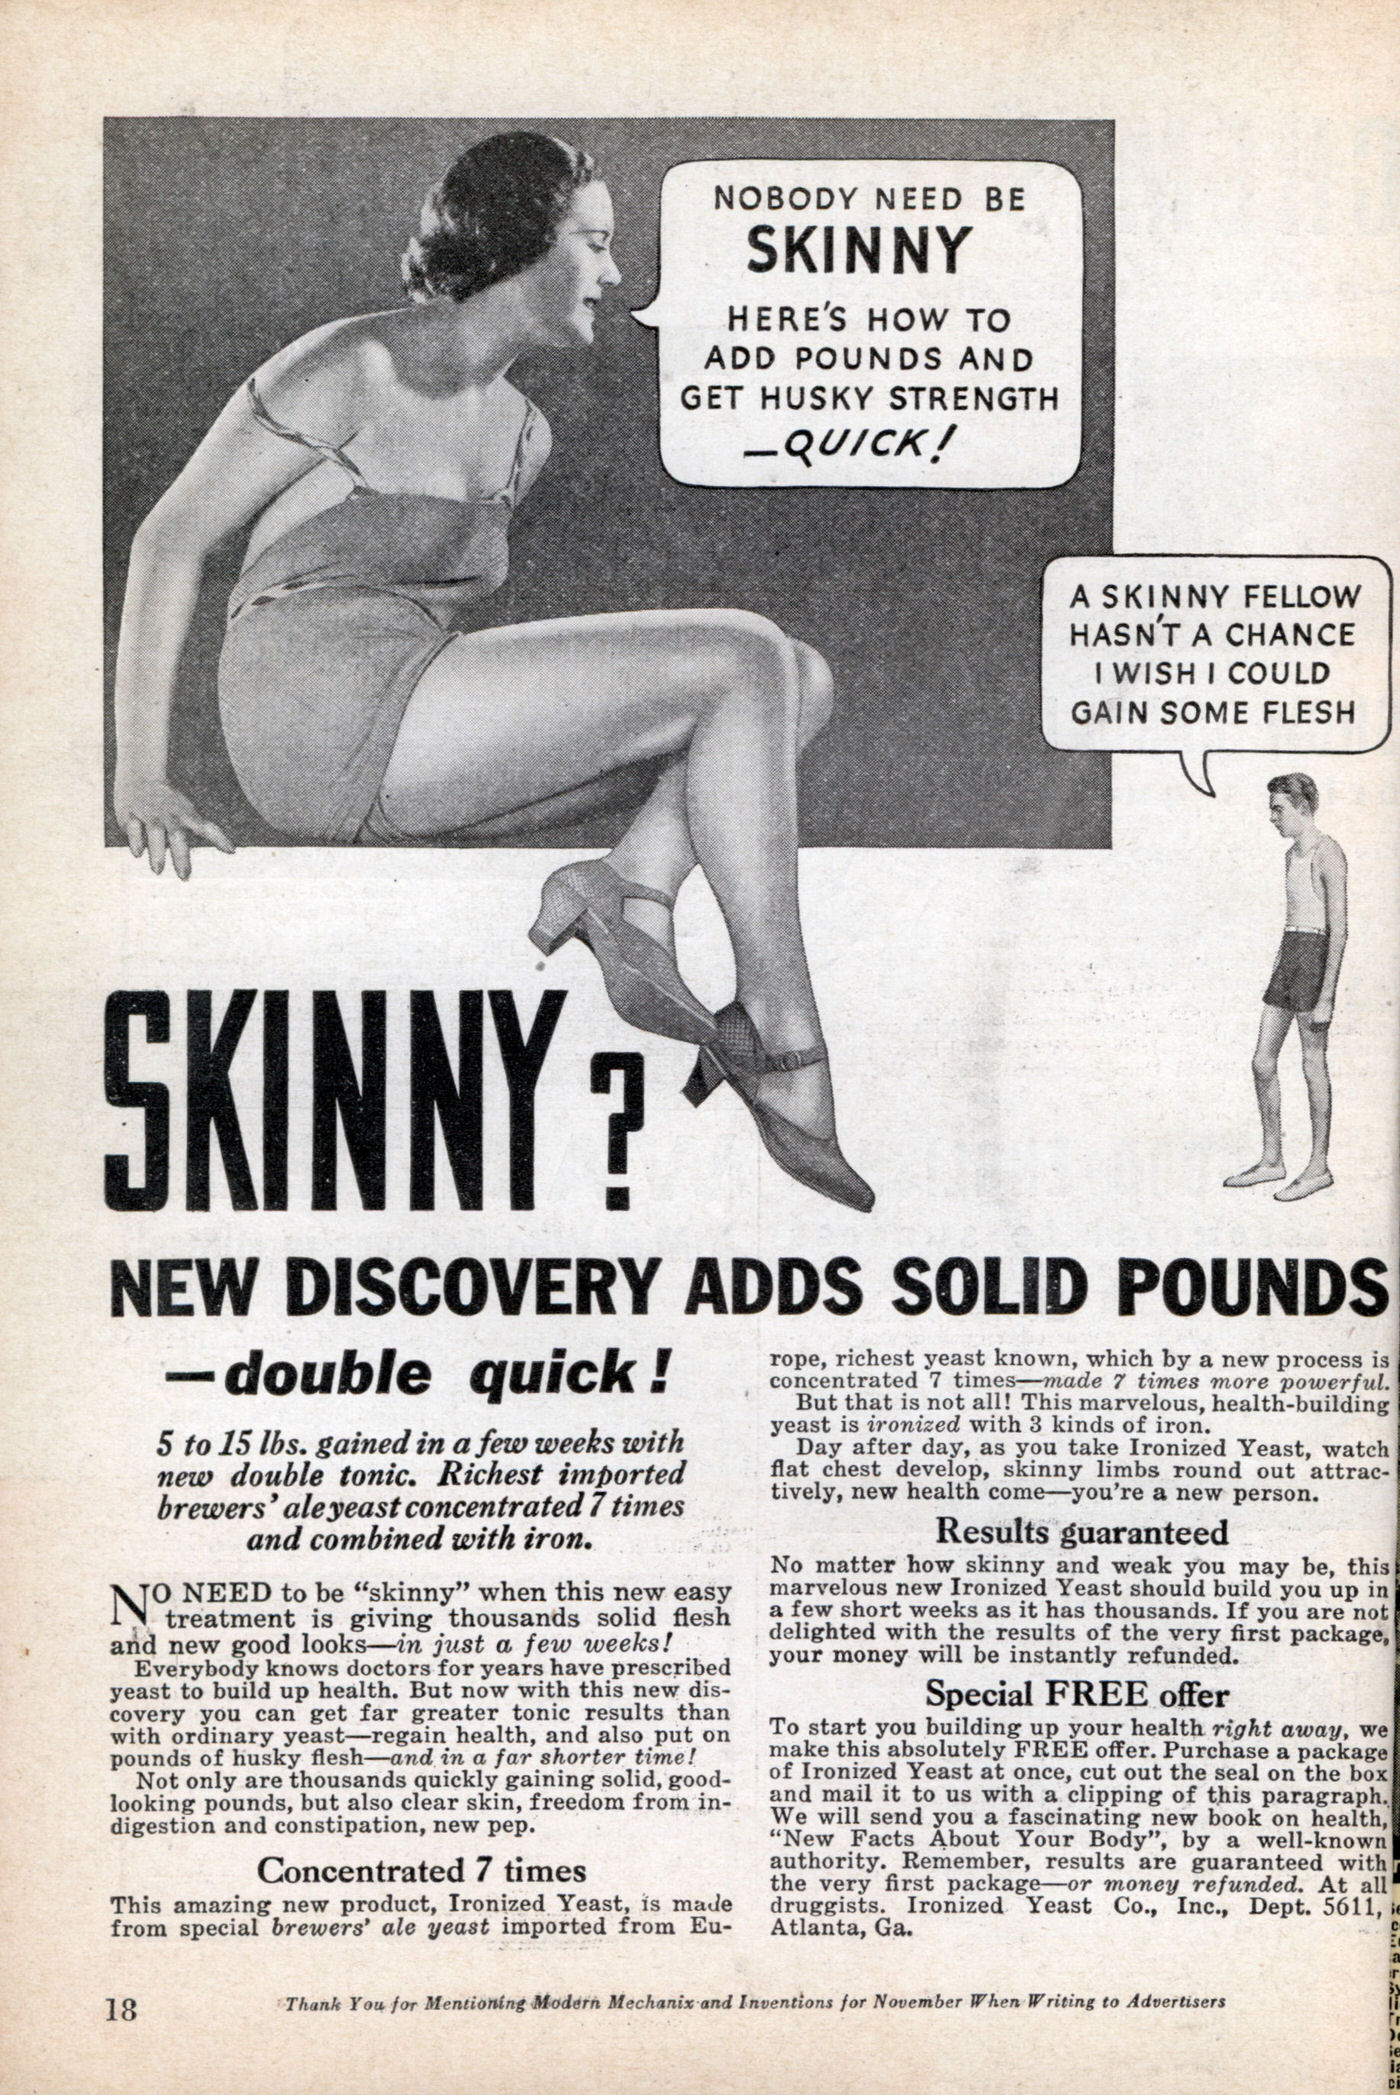 No Skinny Man has an Ounce of Sex Appeal: A Look into 1930s Ads Urging Men to Gain Weight